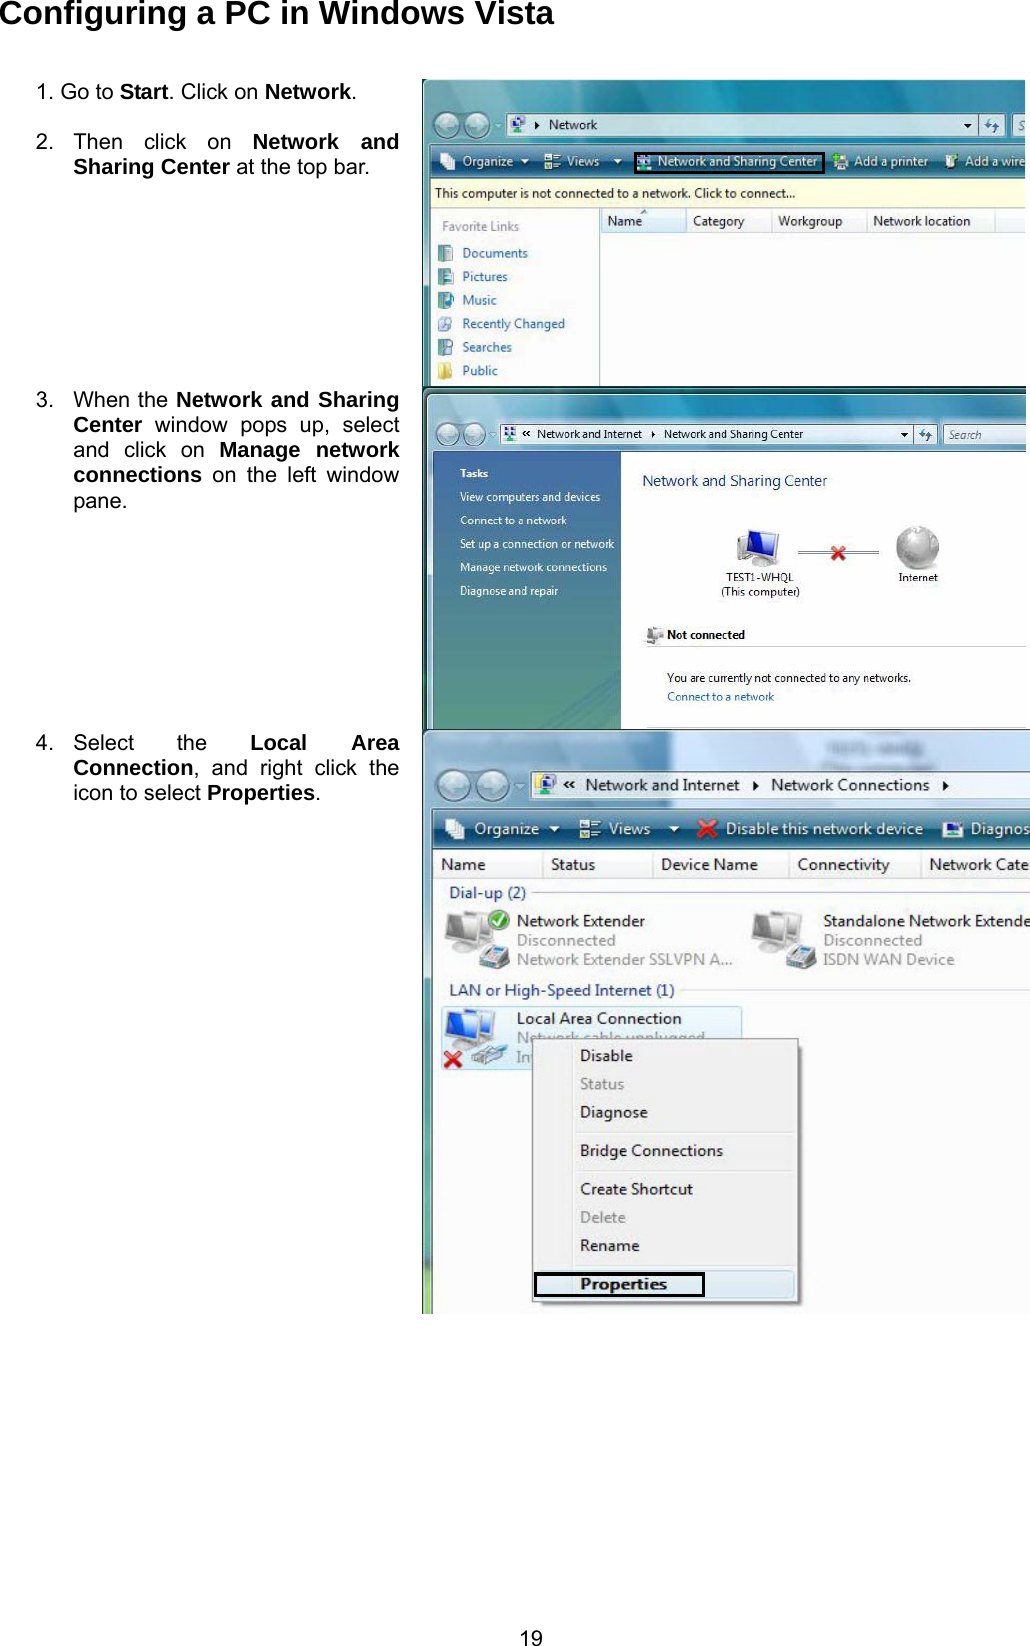  19 Configuring a PC in Windows Vista  1. Go to Start. Click on Network.  2. Then click on Network and Sharing Center at the top bar. 3. When the Network and Sharing Center window pops up, select and click on Manage network connections on the left window pane. 4. Select  the  Local Area Connection, and right click the icon to select Properties. 